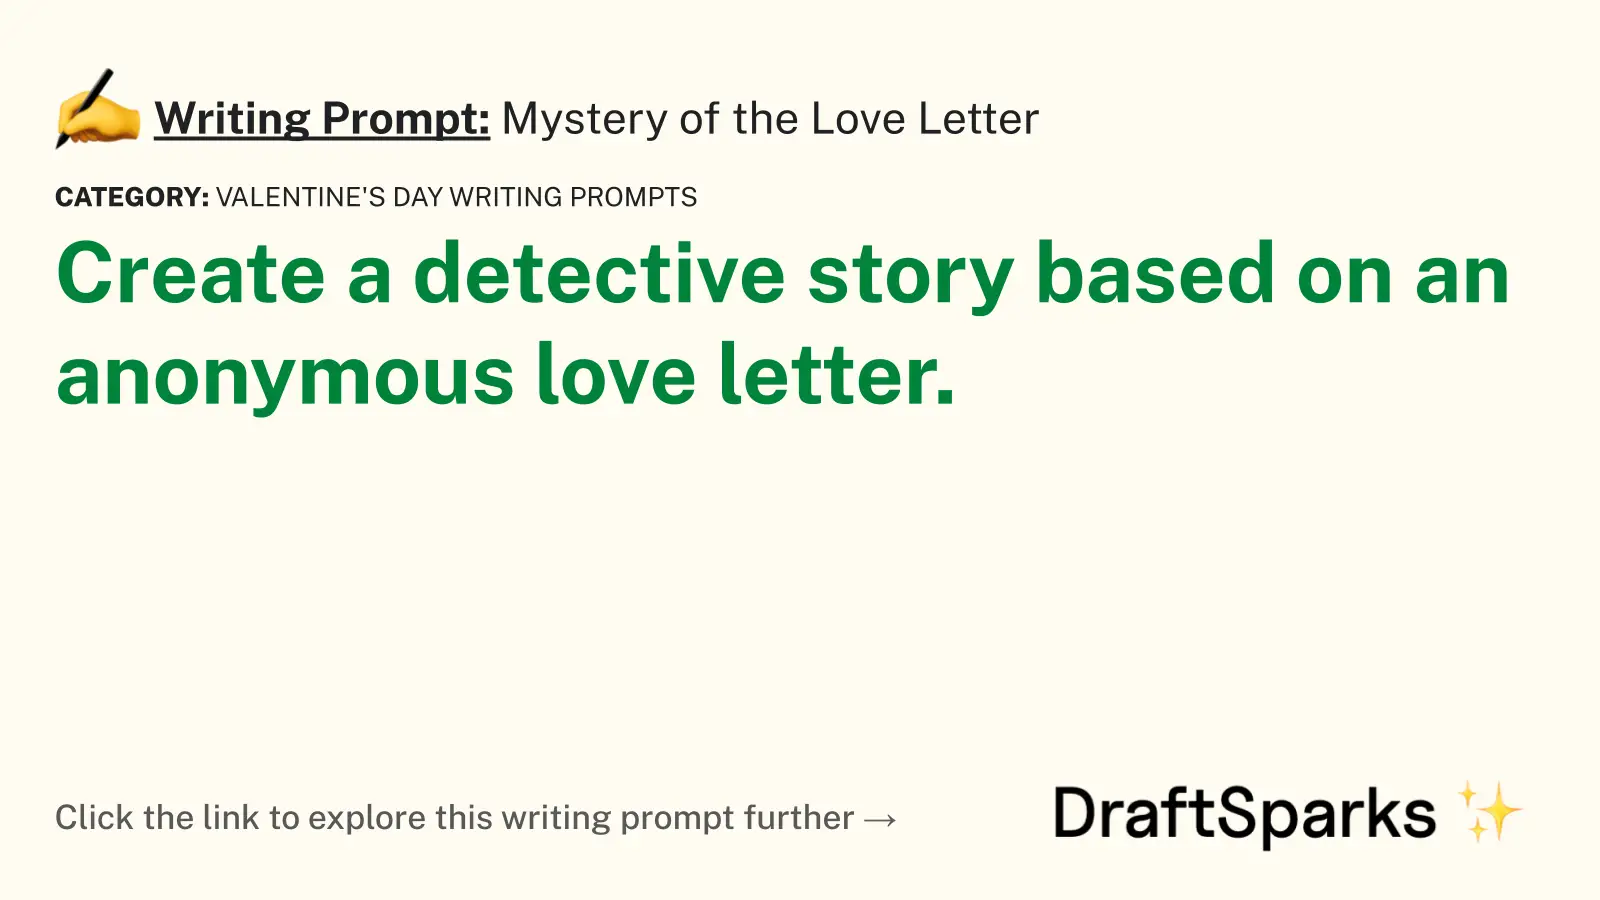 Mystery of the Love Letter